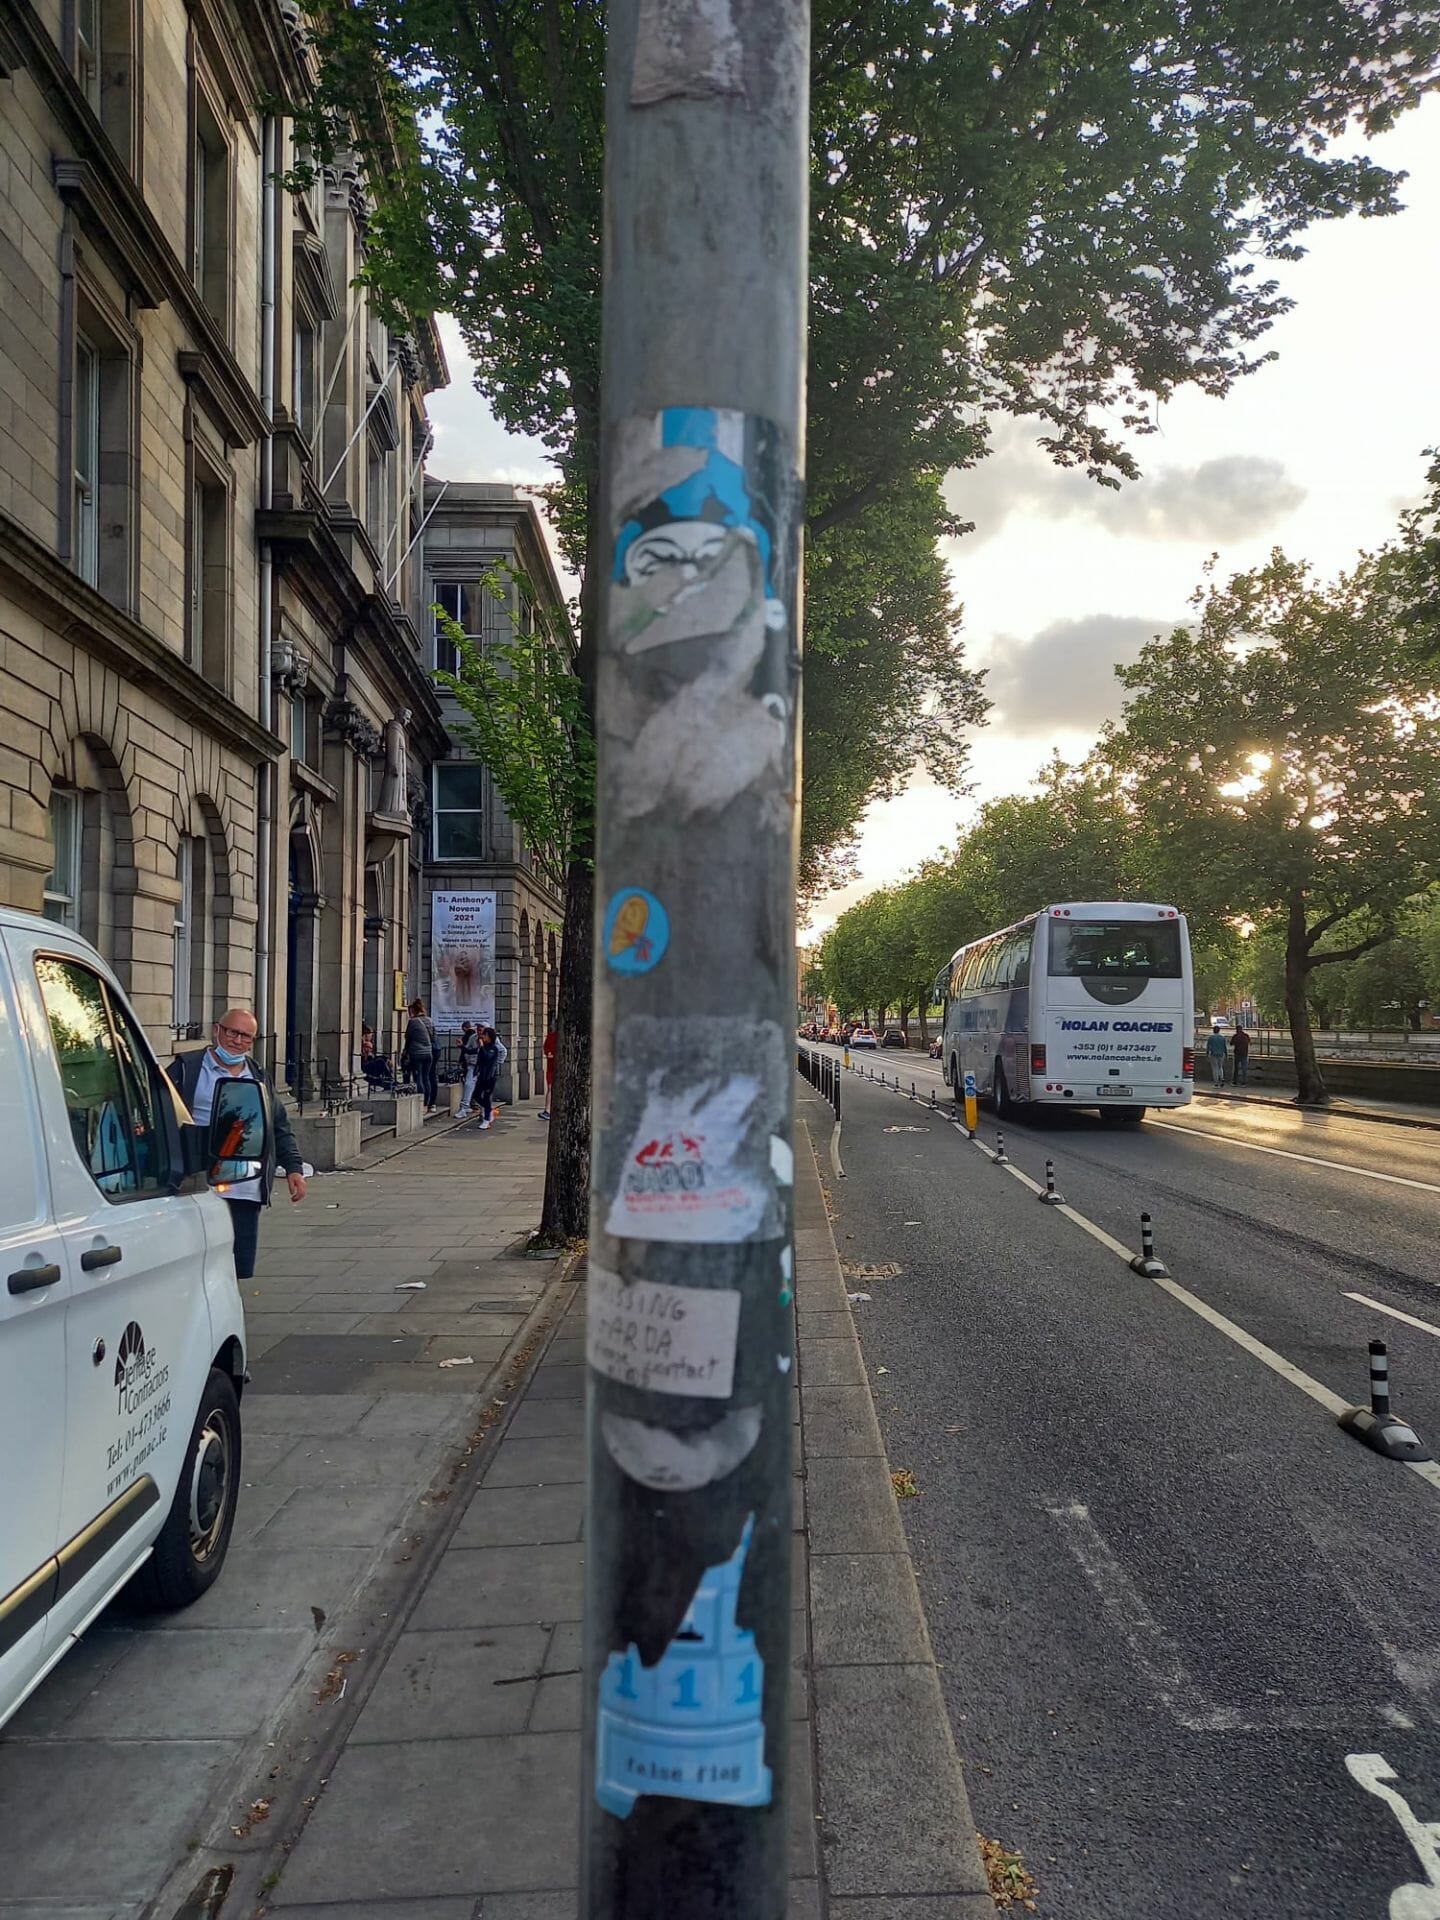 Stickers on Lamp posts